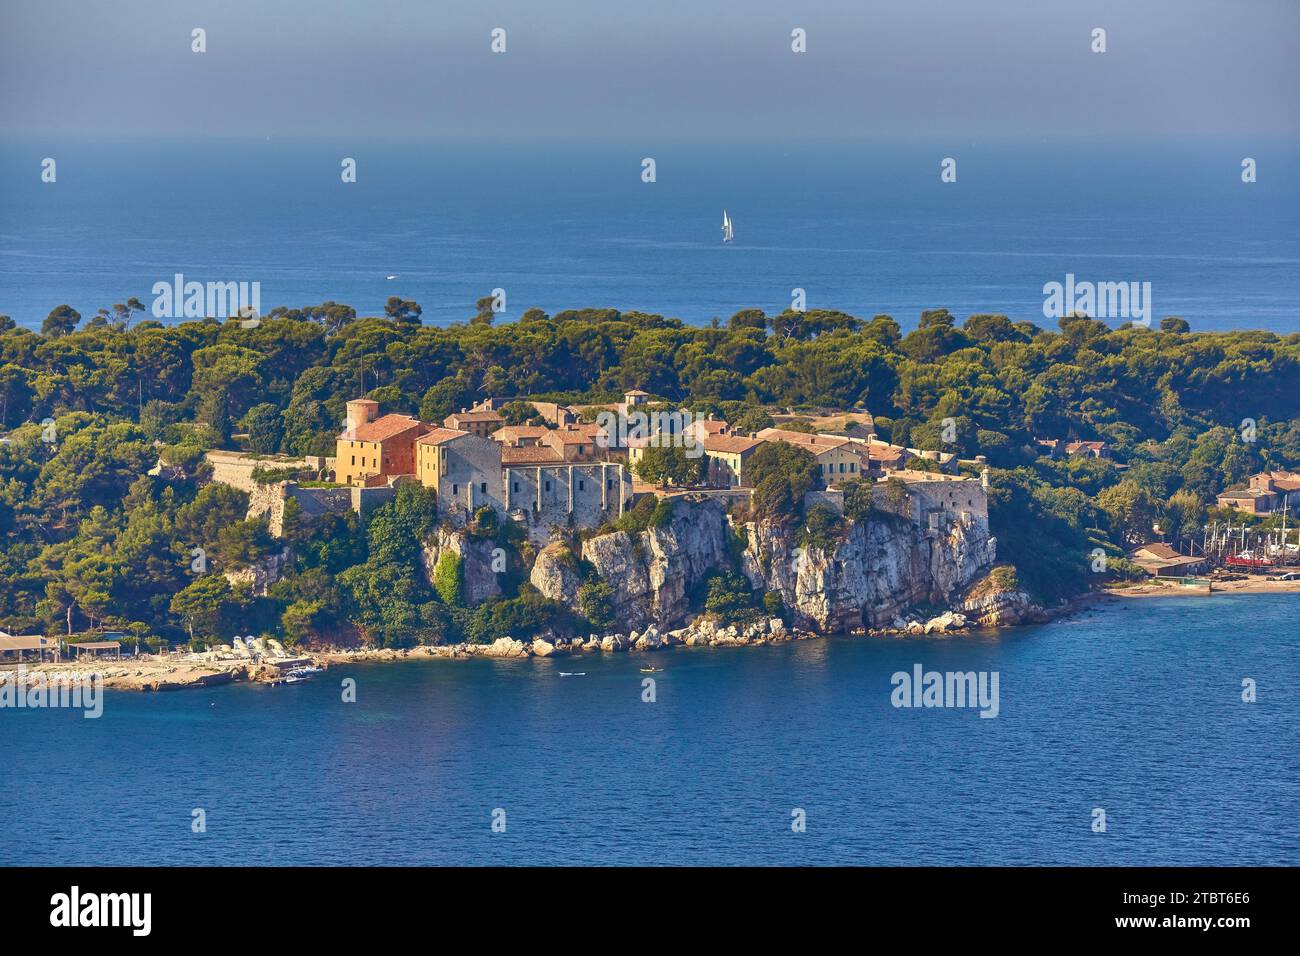 Aerial view of Fort Royal on Ile Saint-Marguerite in the bay of Cannes, South of France. Stock Photo